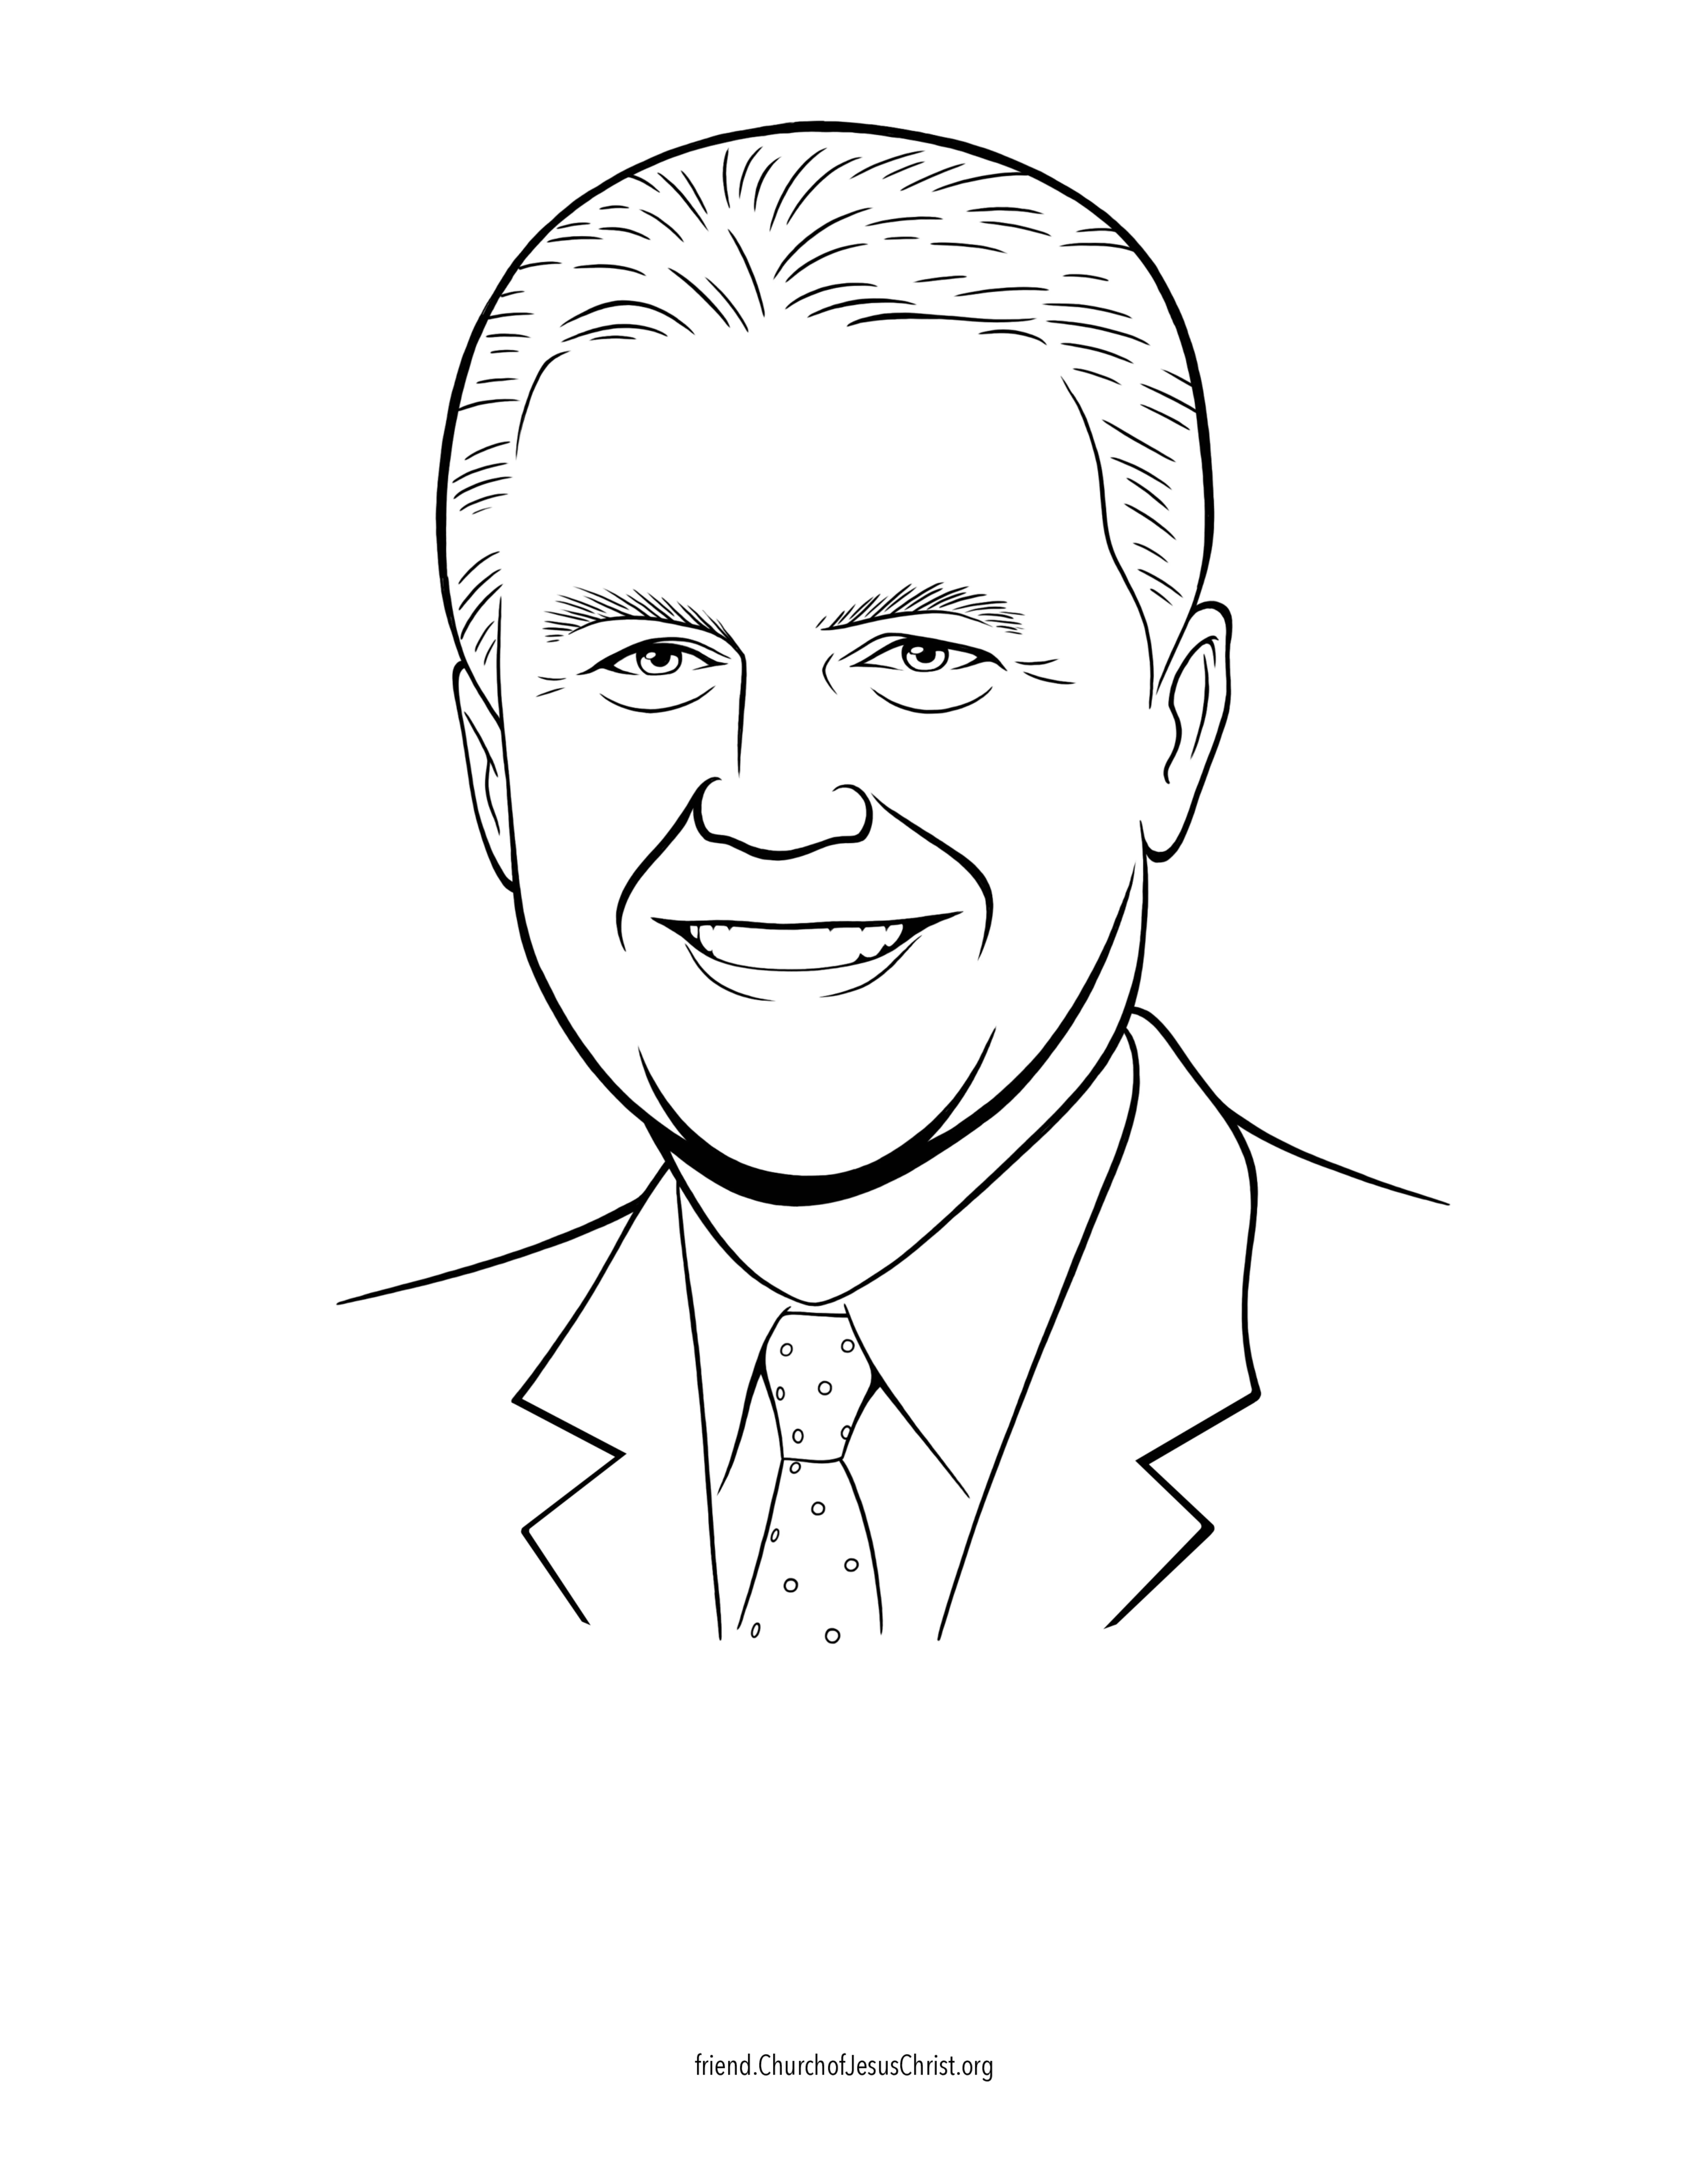 A coloring page of the official portrait of Dieter F. Uchtdorf.